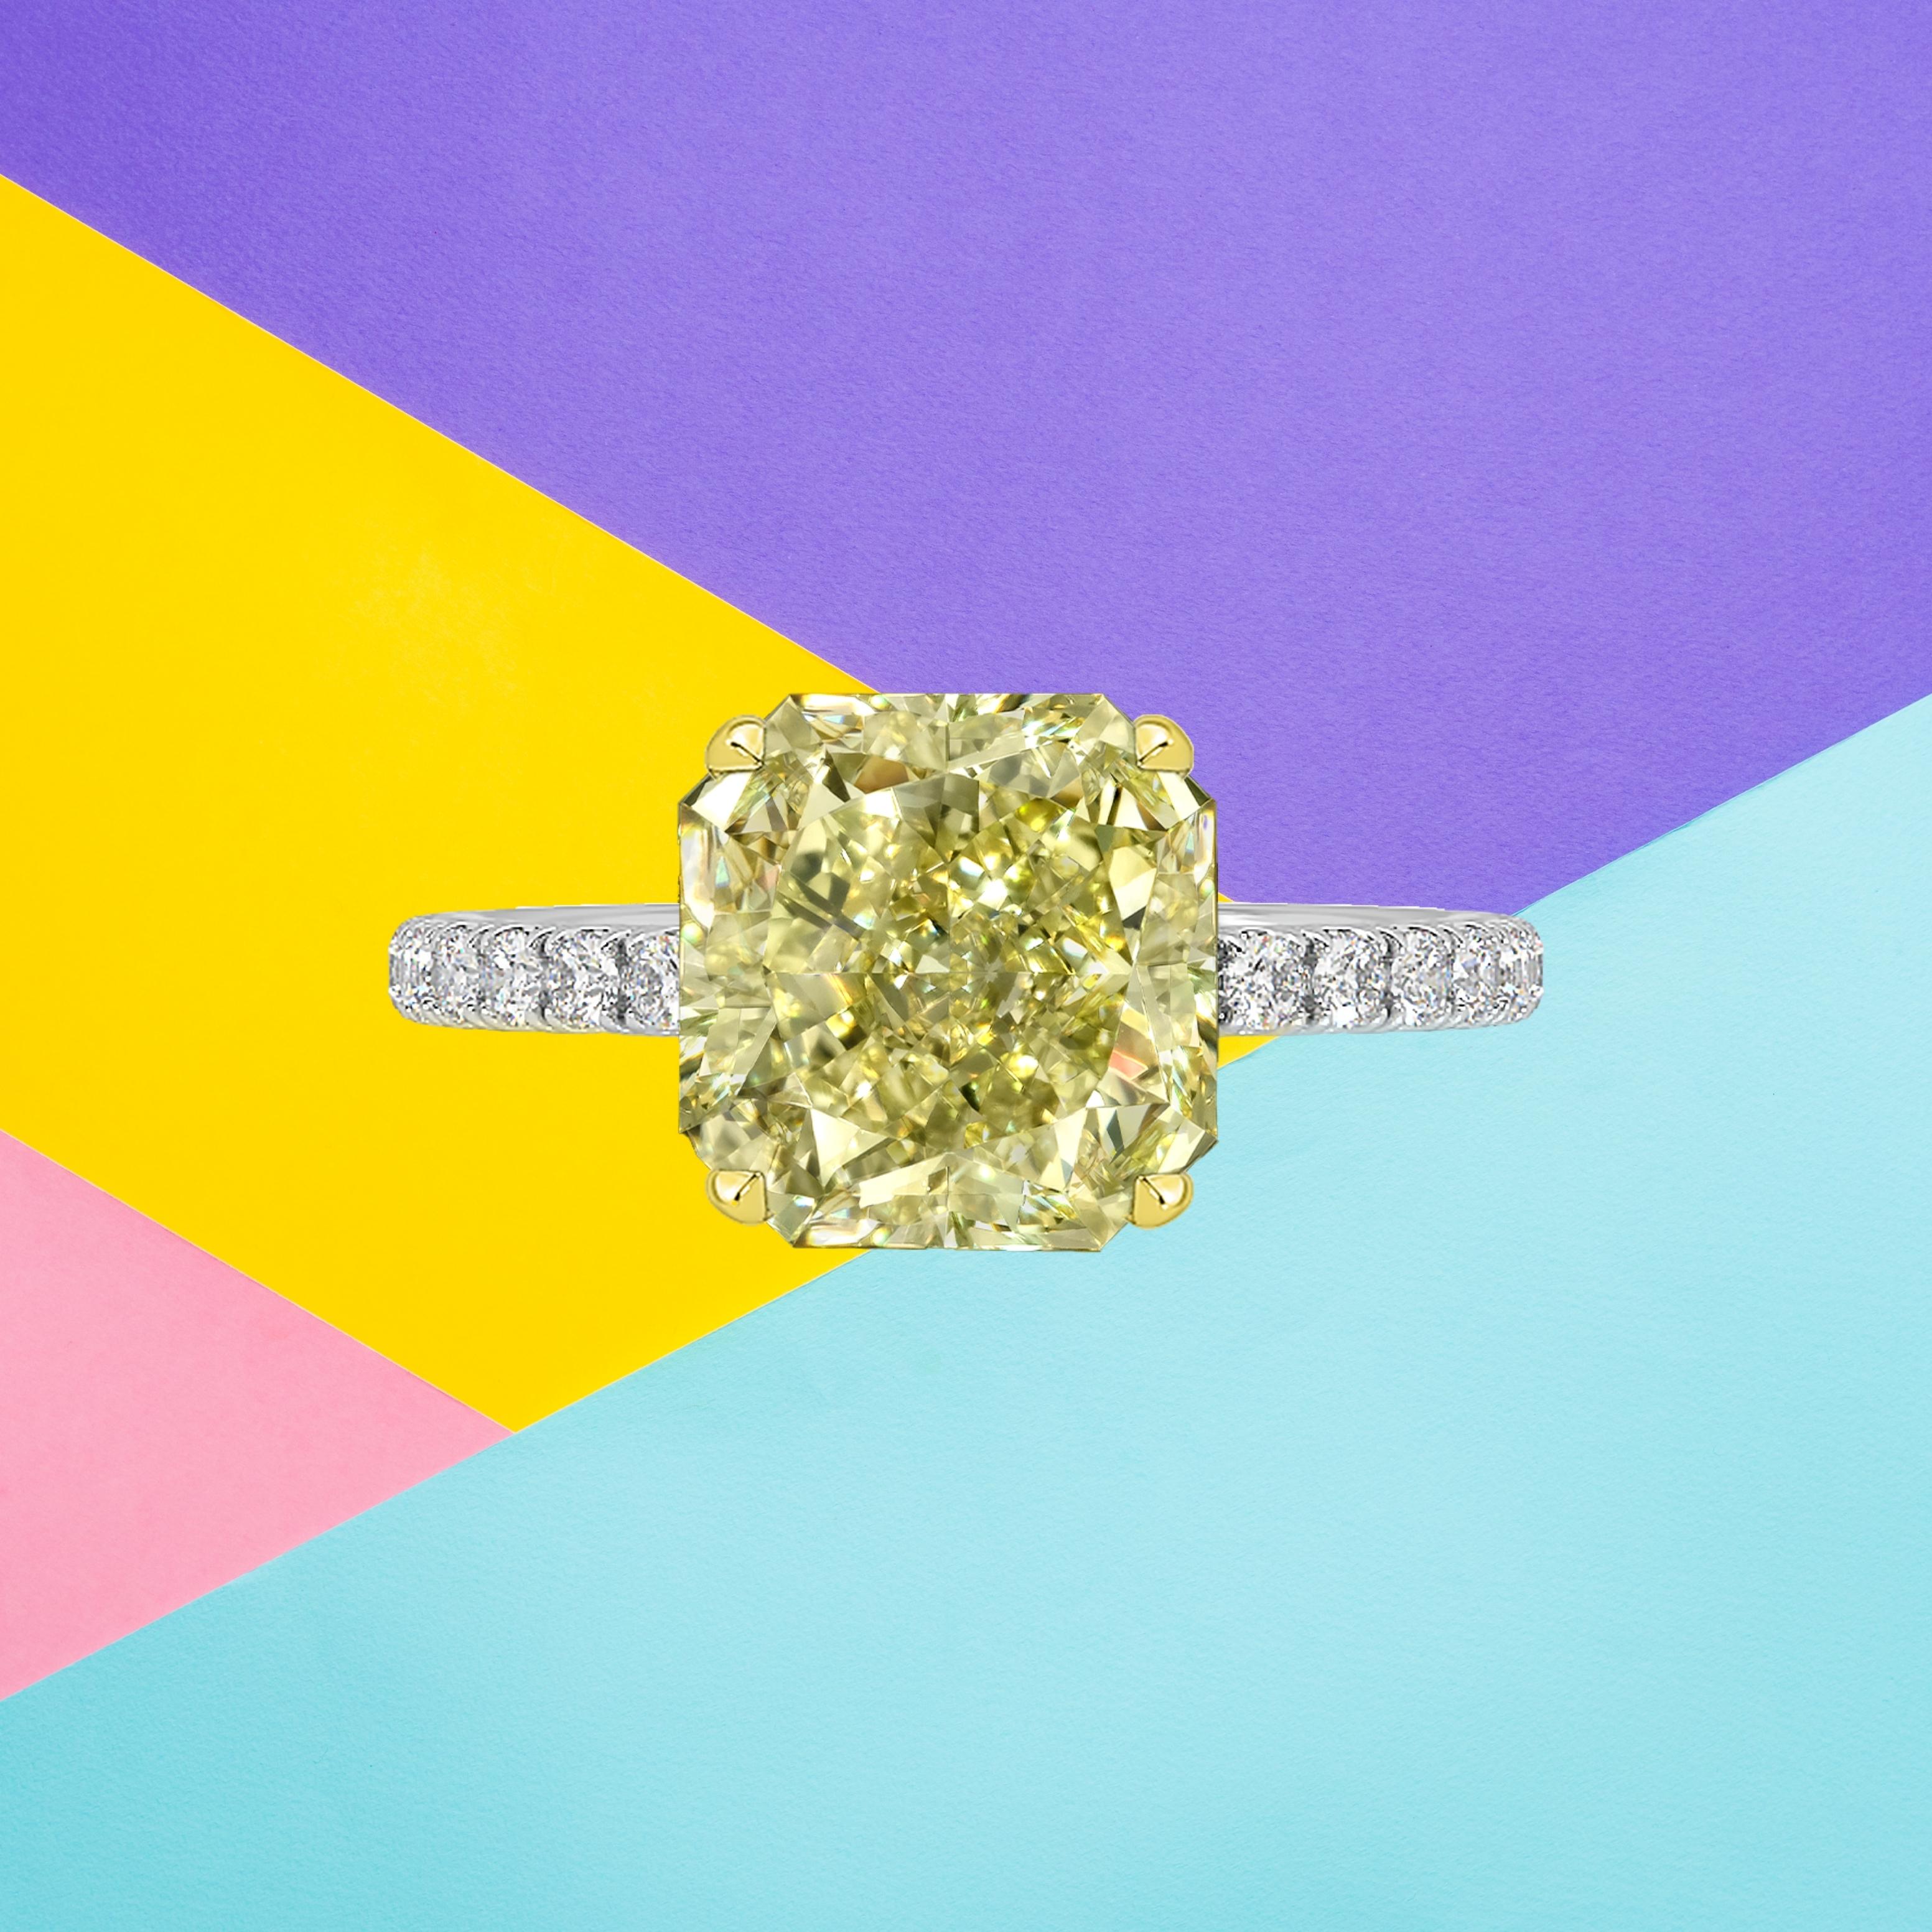 This radiant cut diamond weighs 2.40 carat and is certified 'Fancy Yellow' color by the Gemological Institute of America. The GIA has also assigned a VVS1 clarity grading to the stone. The diamond has been inscribed with the certificate number to